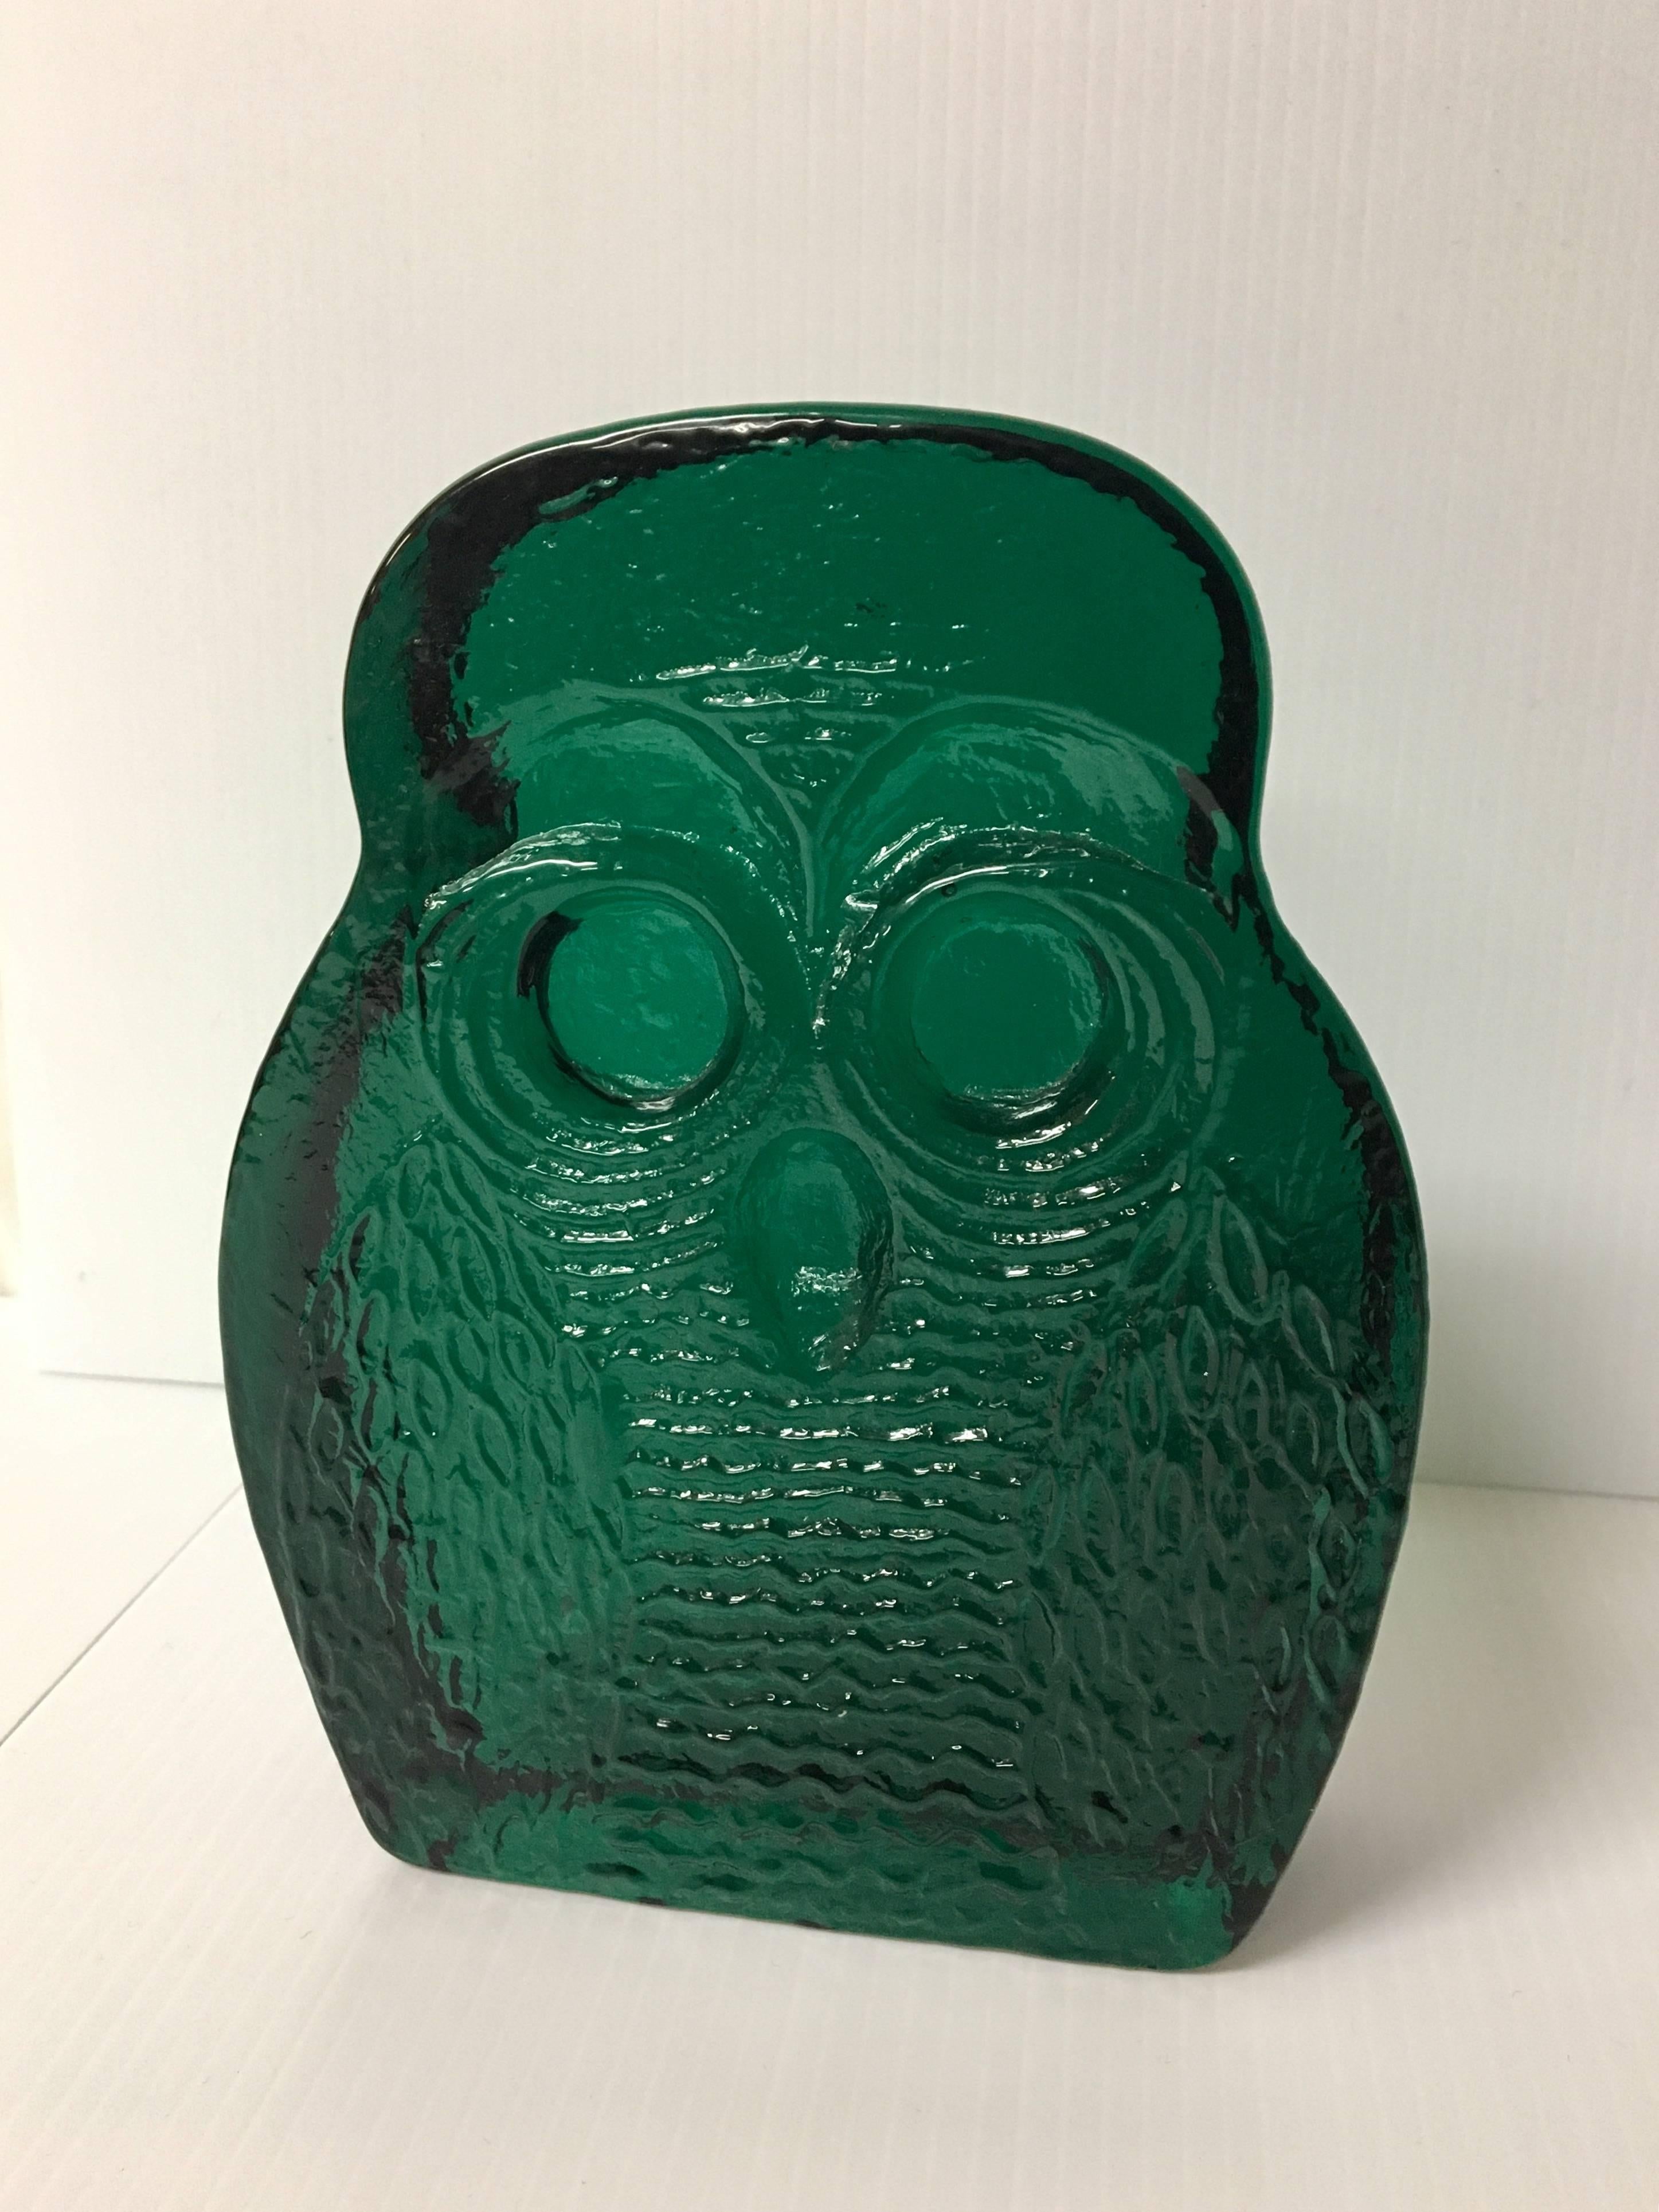 Unique emerald green glass owl by Blenko. Thick, heavy glass piece would work well as a bookend, paperweight or a home decor item.